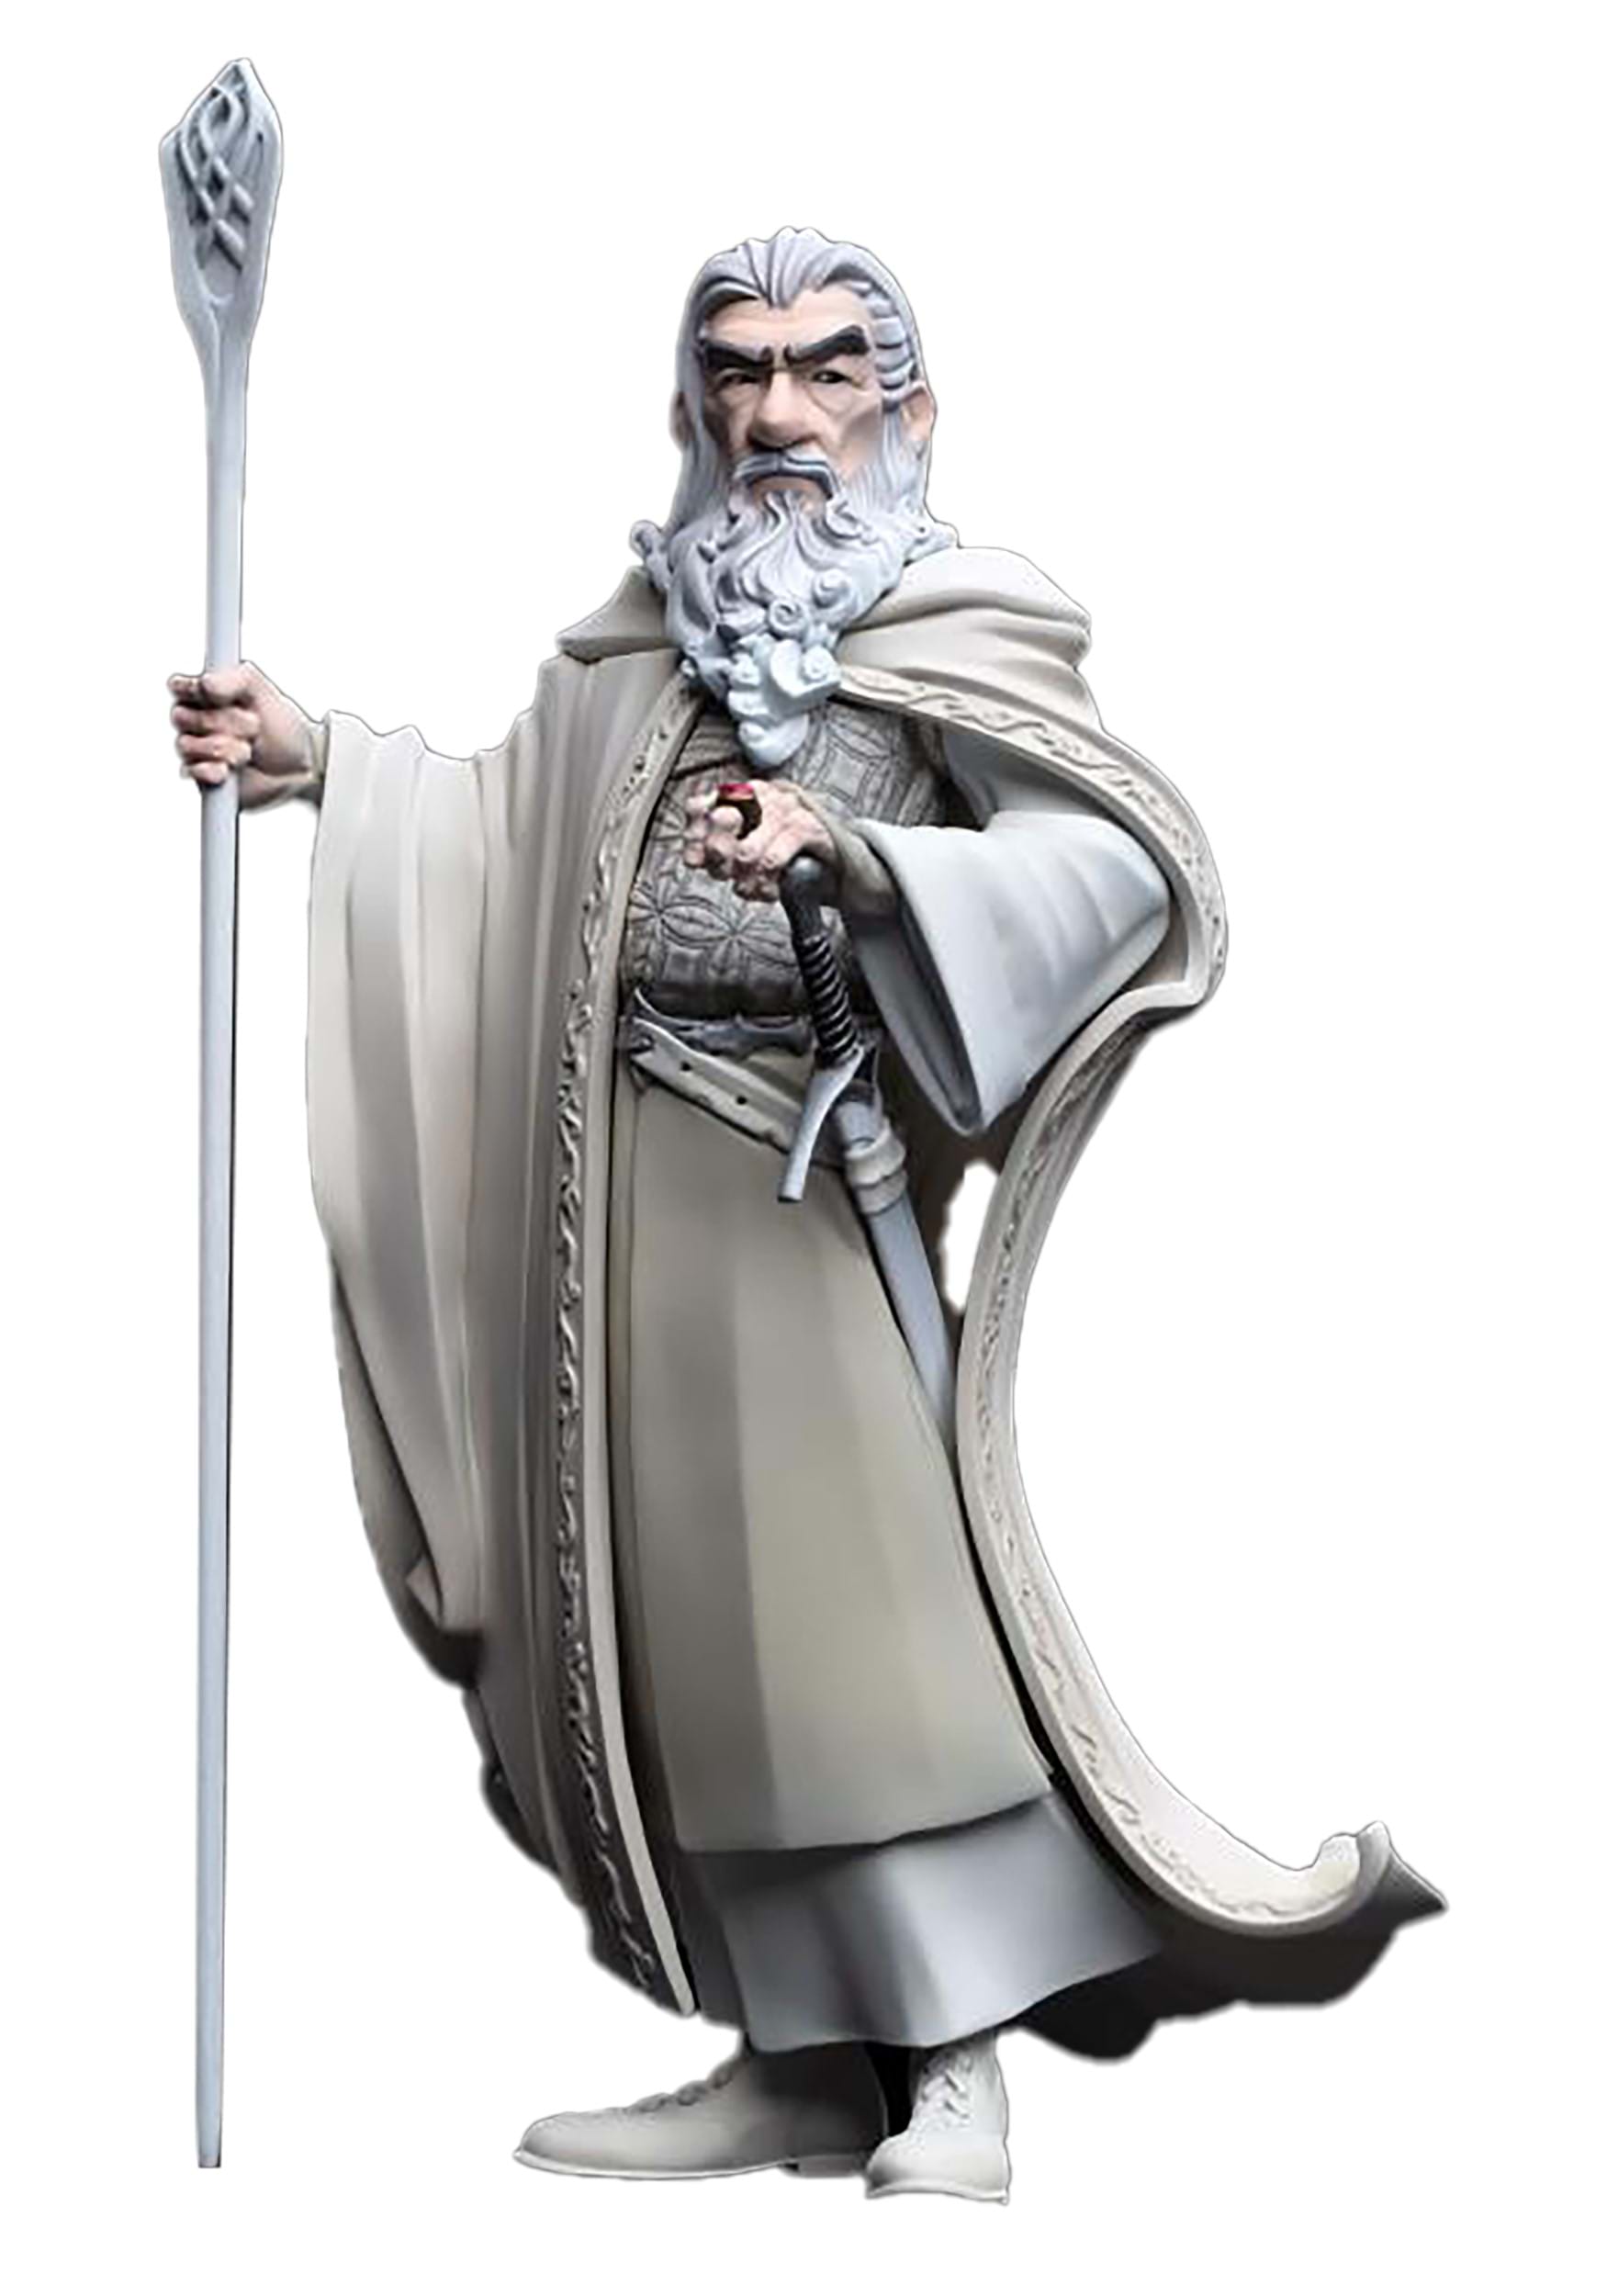 Lord of the Rings Mini Epic Gandalf the White Vinyl Figure